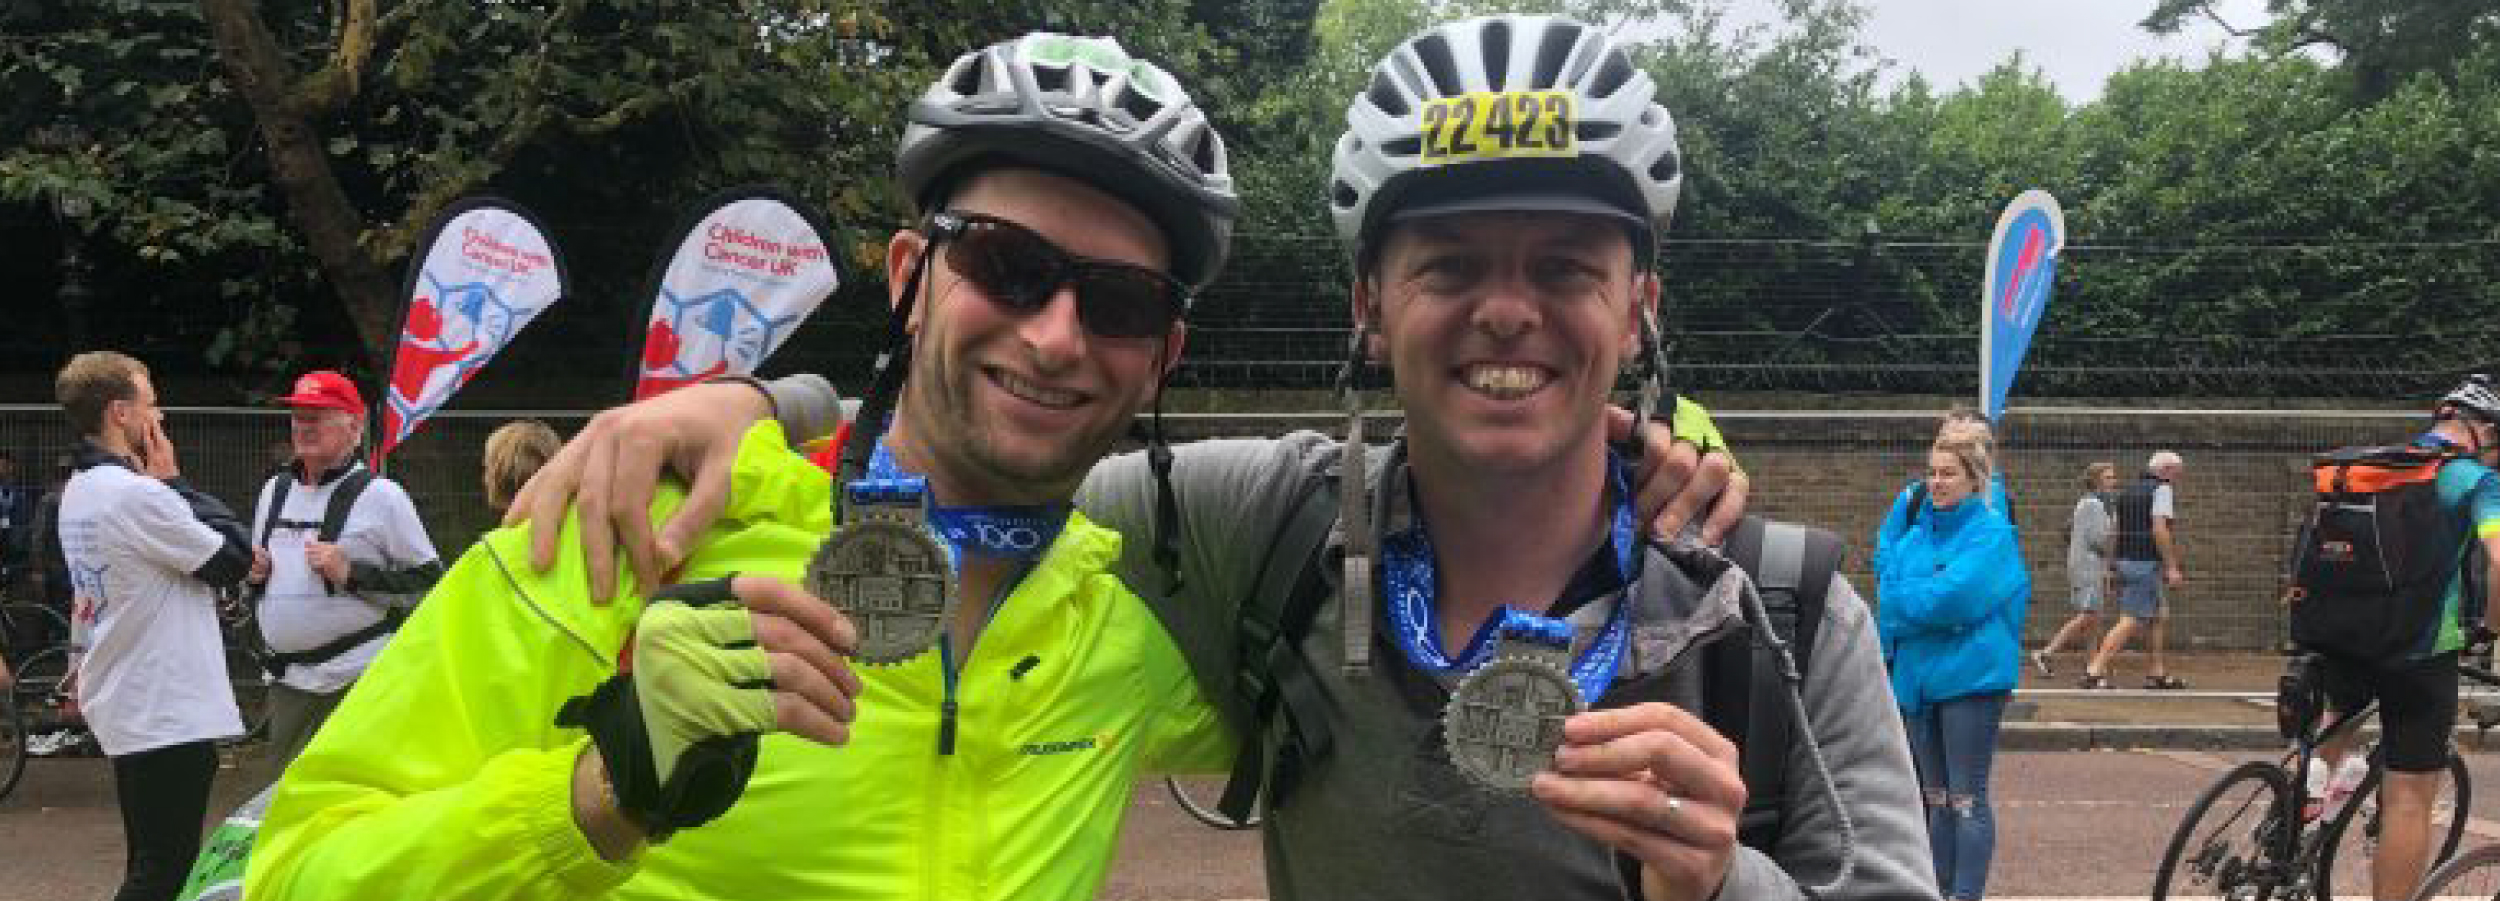 holding medals after completing cycle ride